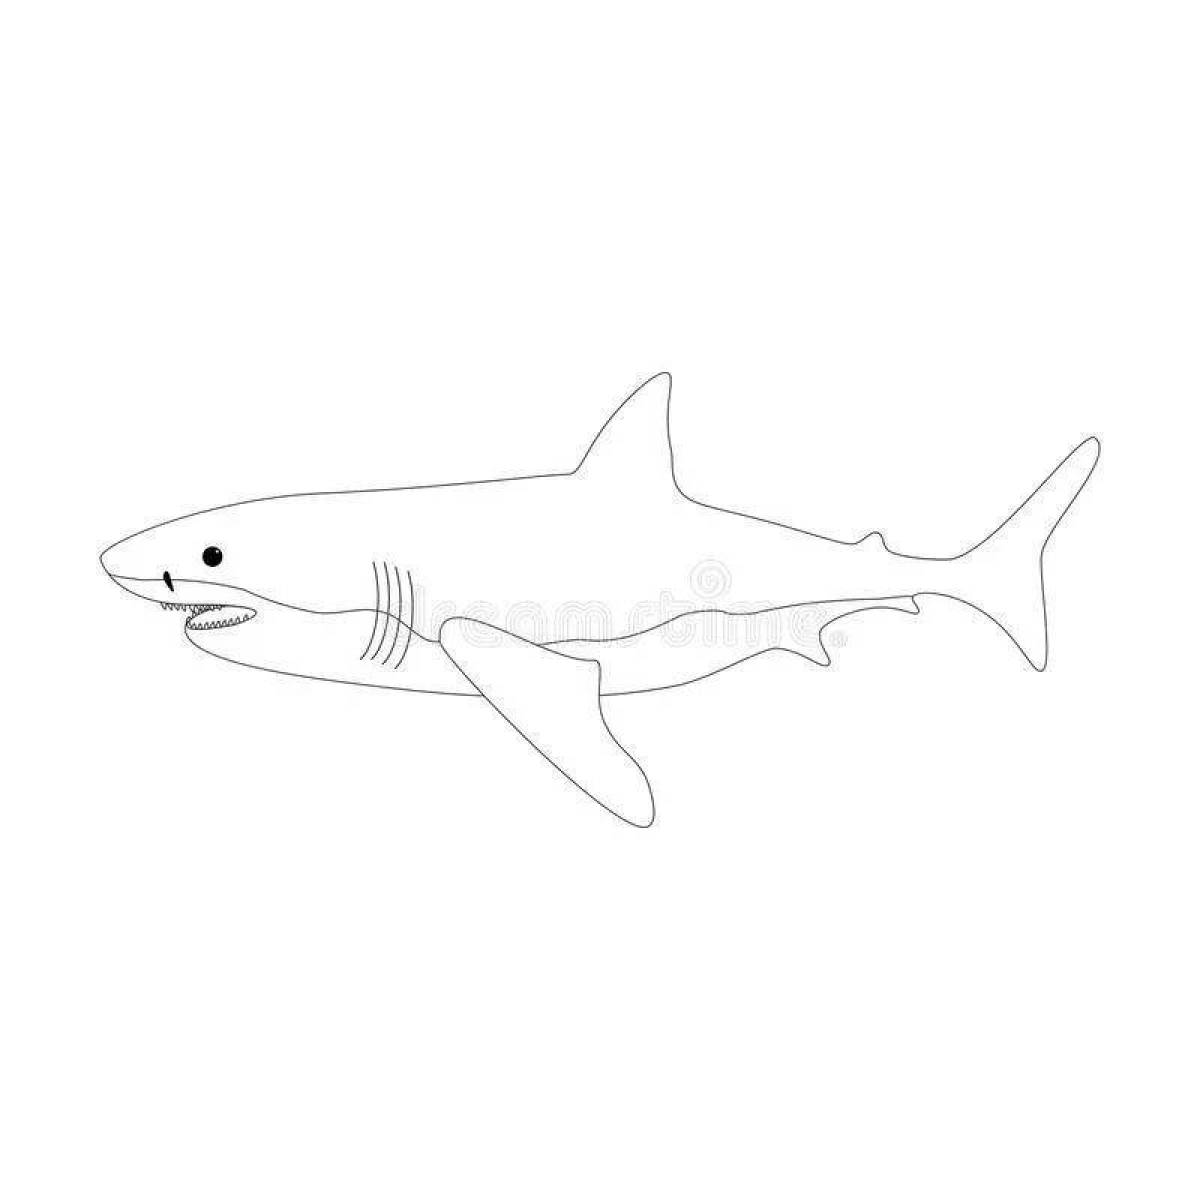 Live coloring shark from ikea